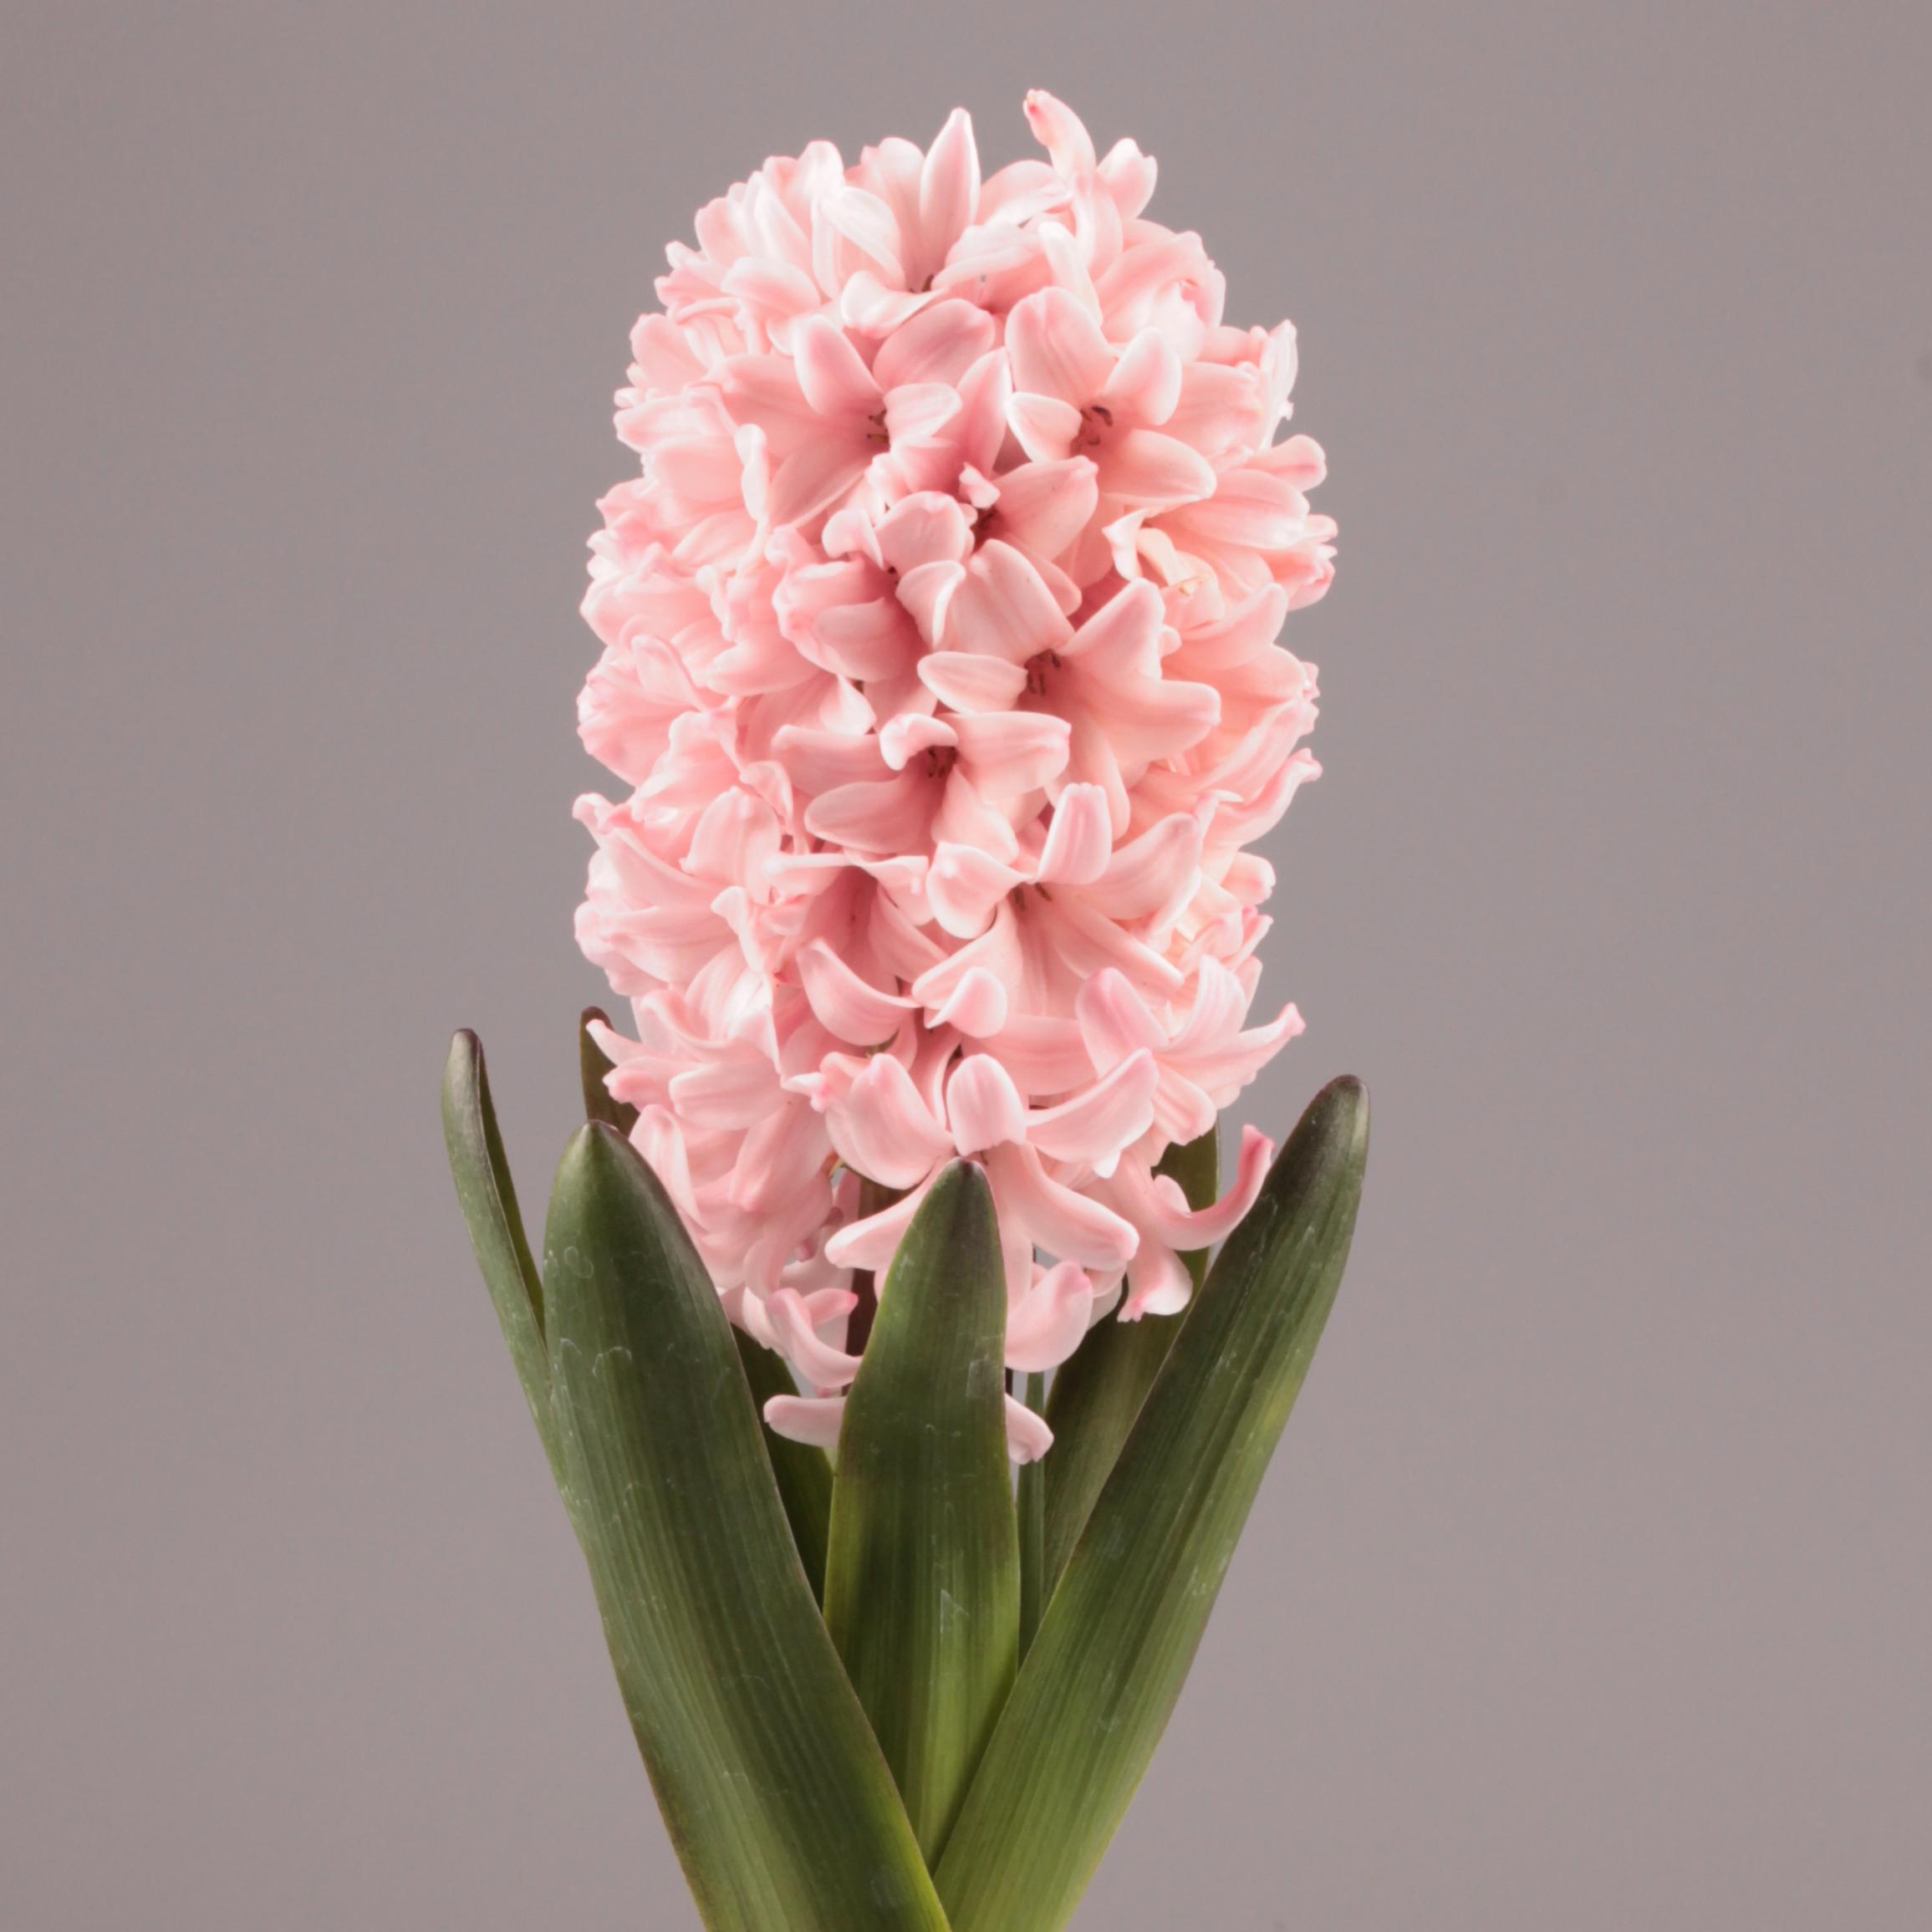 Hyacinth 'Apricot Passion' - Hyacinth - Coming Soon for Fall 2024 from Leo Berbee Bulb Company